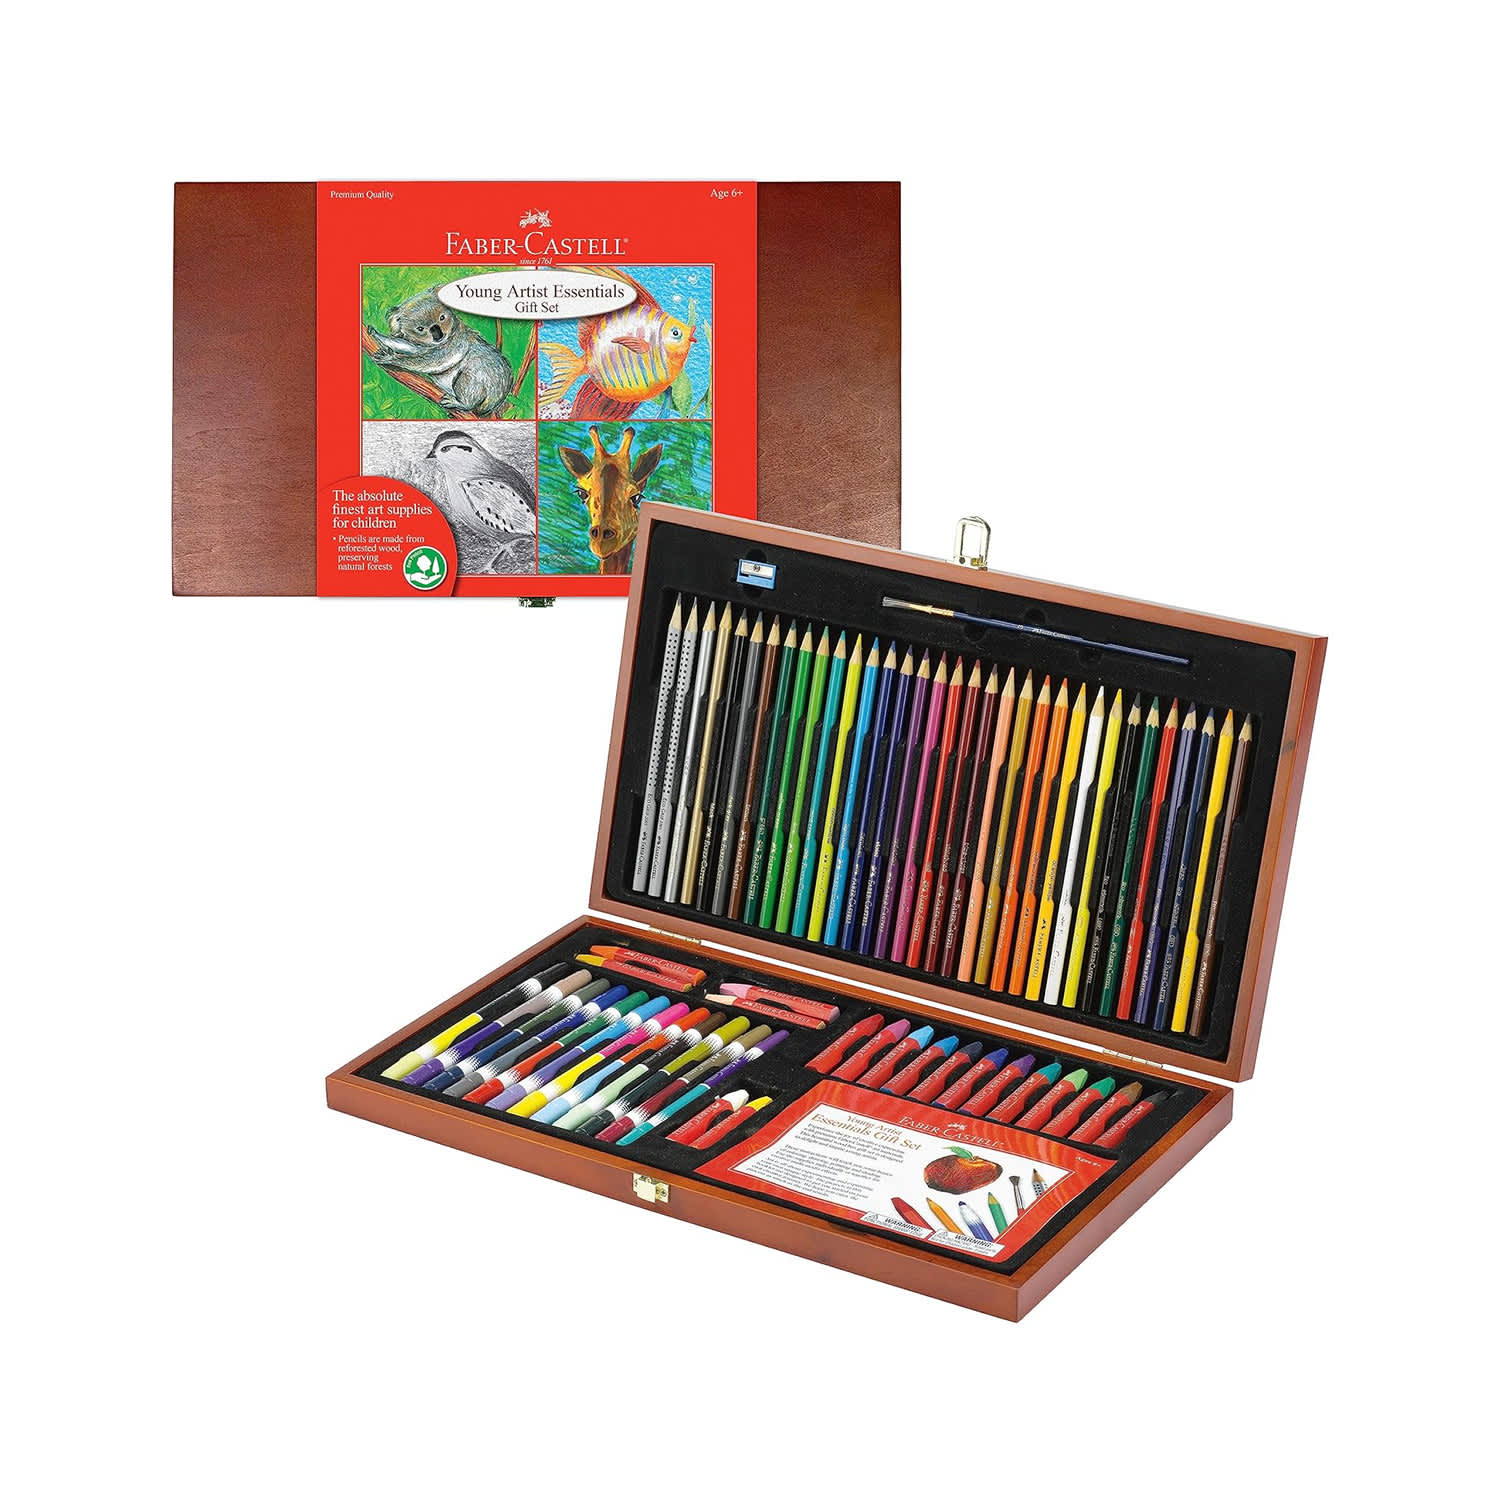 Best Art Supplies For Kids 2023 - Forbes Vetted